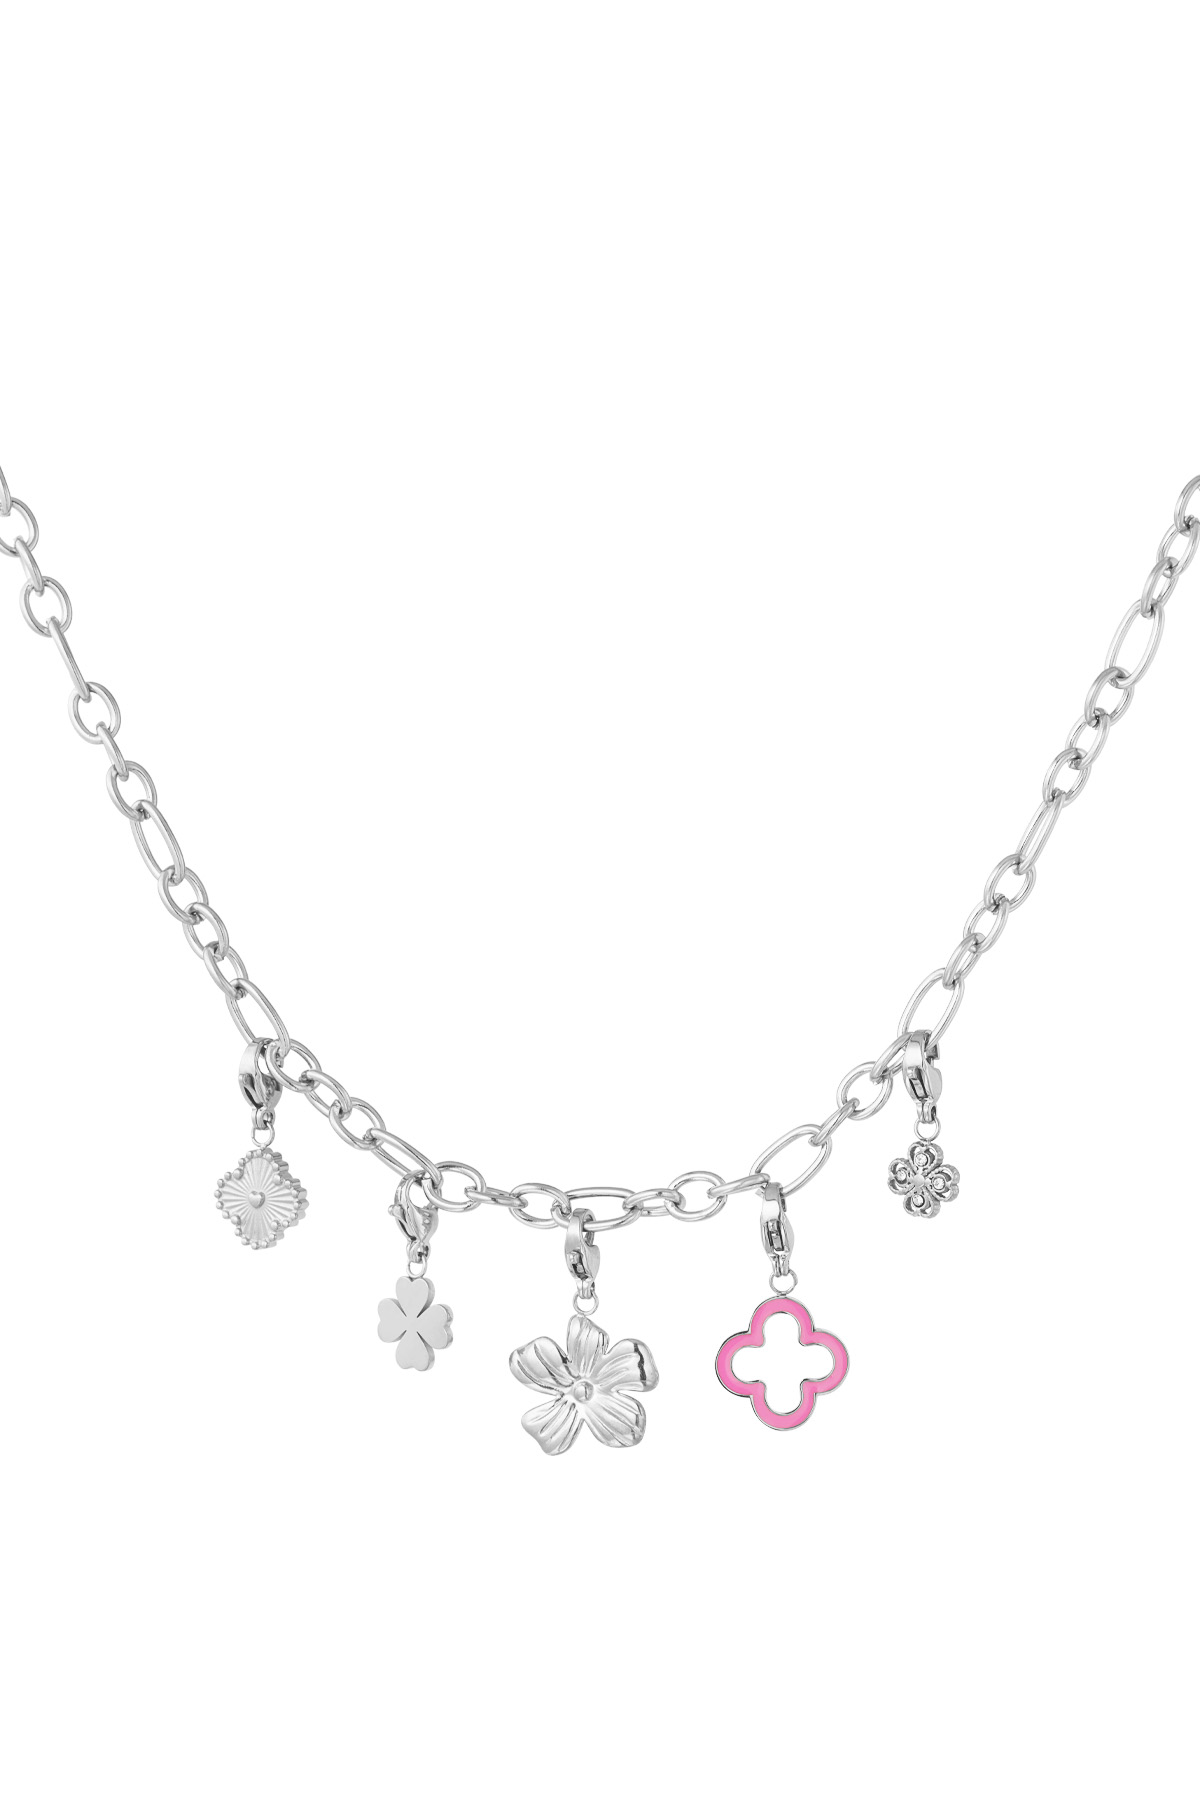 Necklace with clover and flower charms - silver